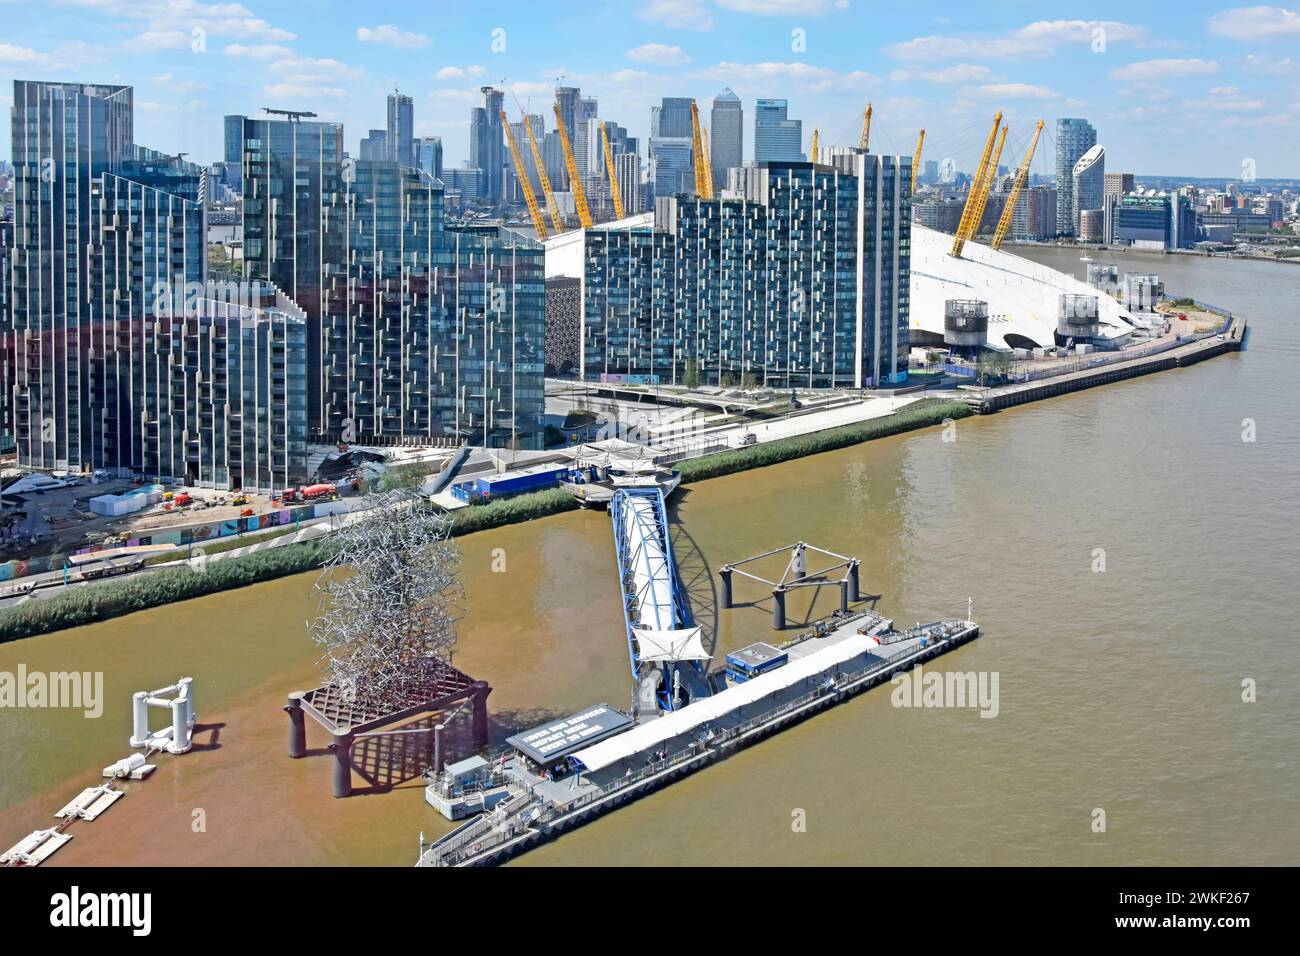 Greenwich Pier Peninsular high tide River Thames modern high rise developments beside O2 arena roof Canary Wharf landmarks distant  London England UK Stock Photo